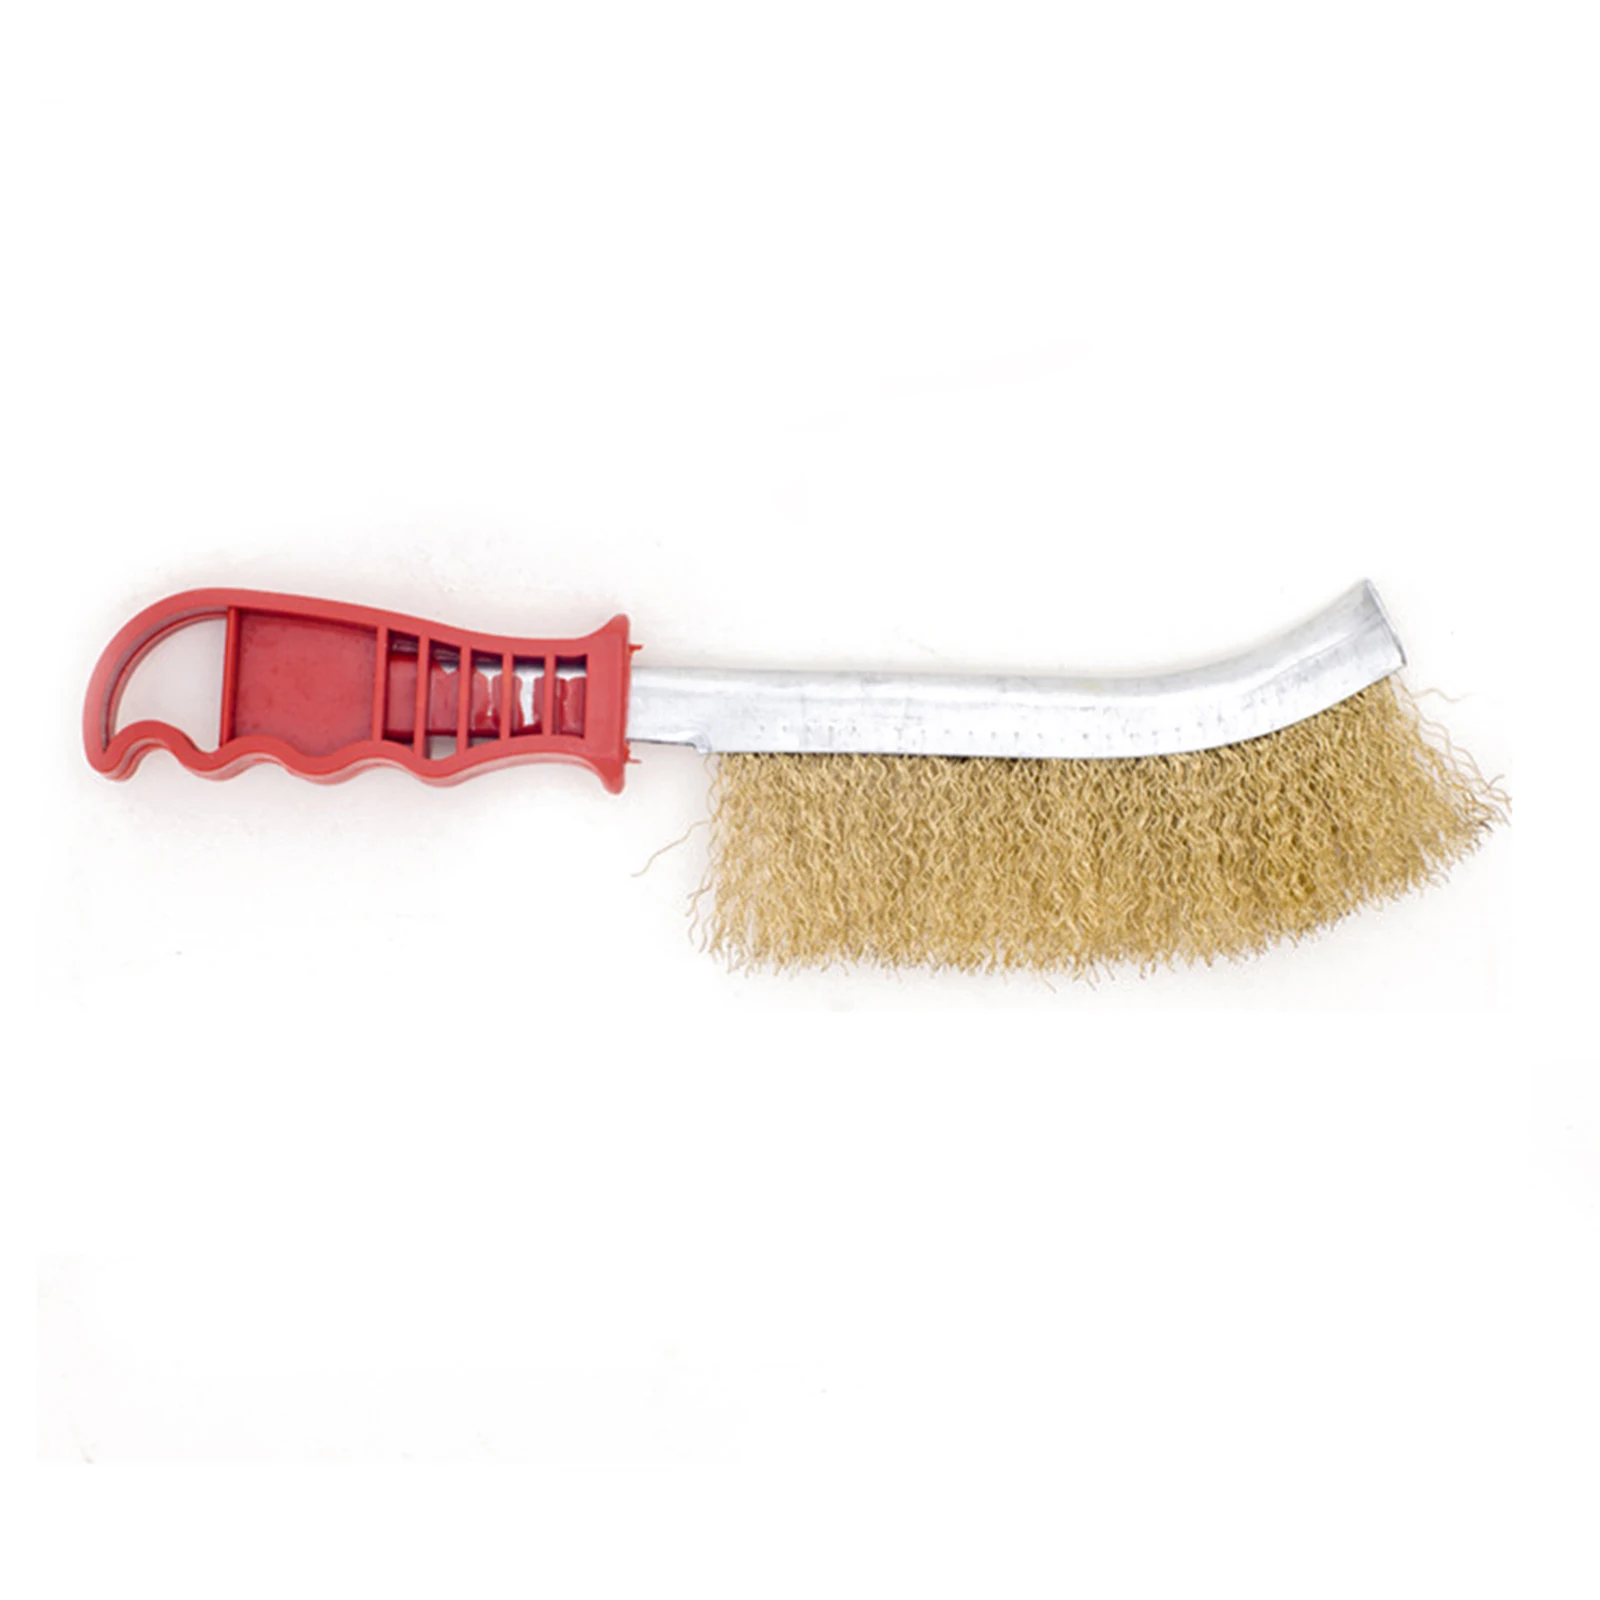 BBQ Cleaning Brush Wire Brush Accessories Brass Brass Plated Steel Wire Cleaning Equipment Heavy Duty Home Plastic Handle Red